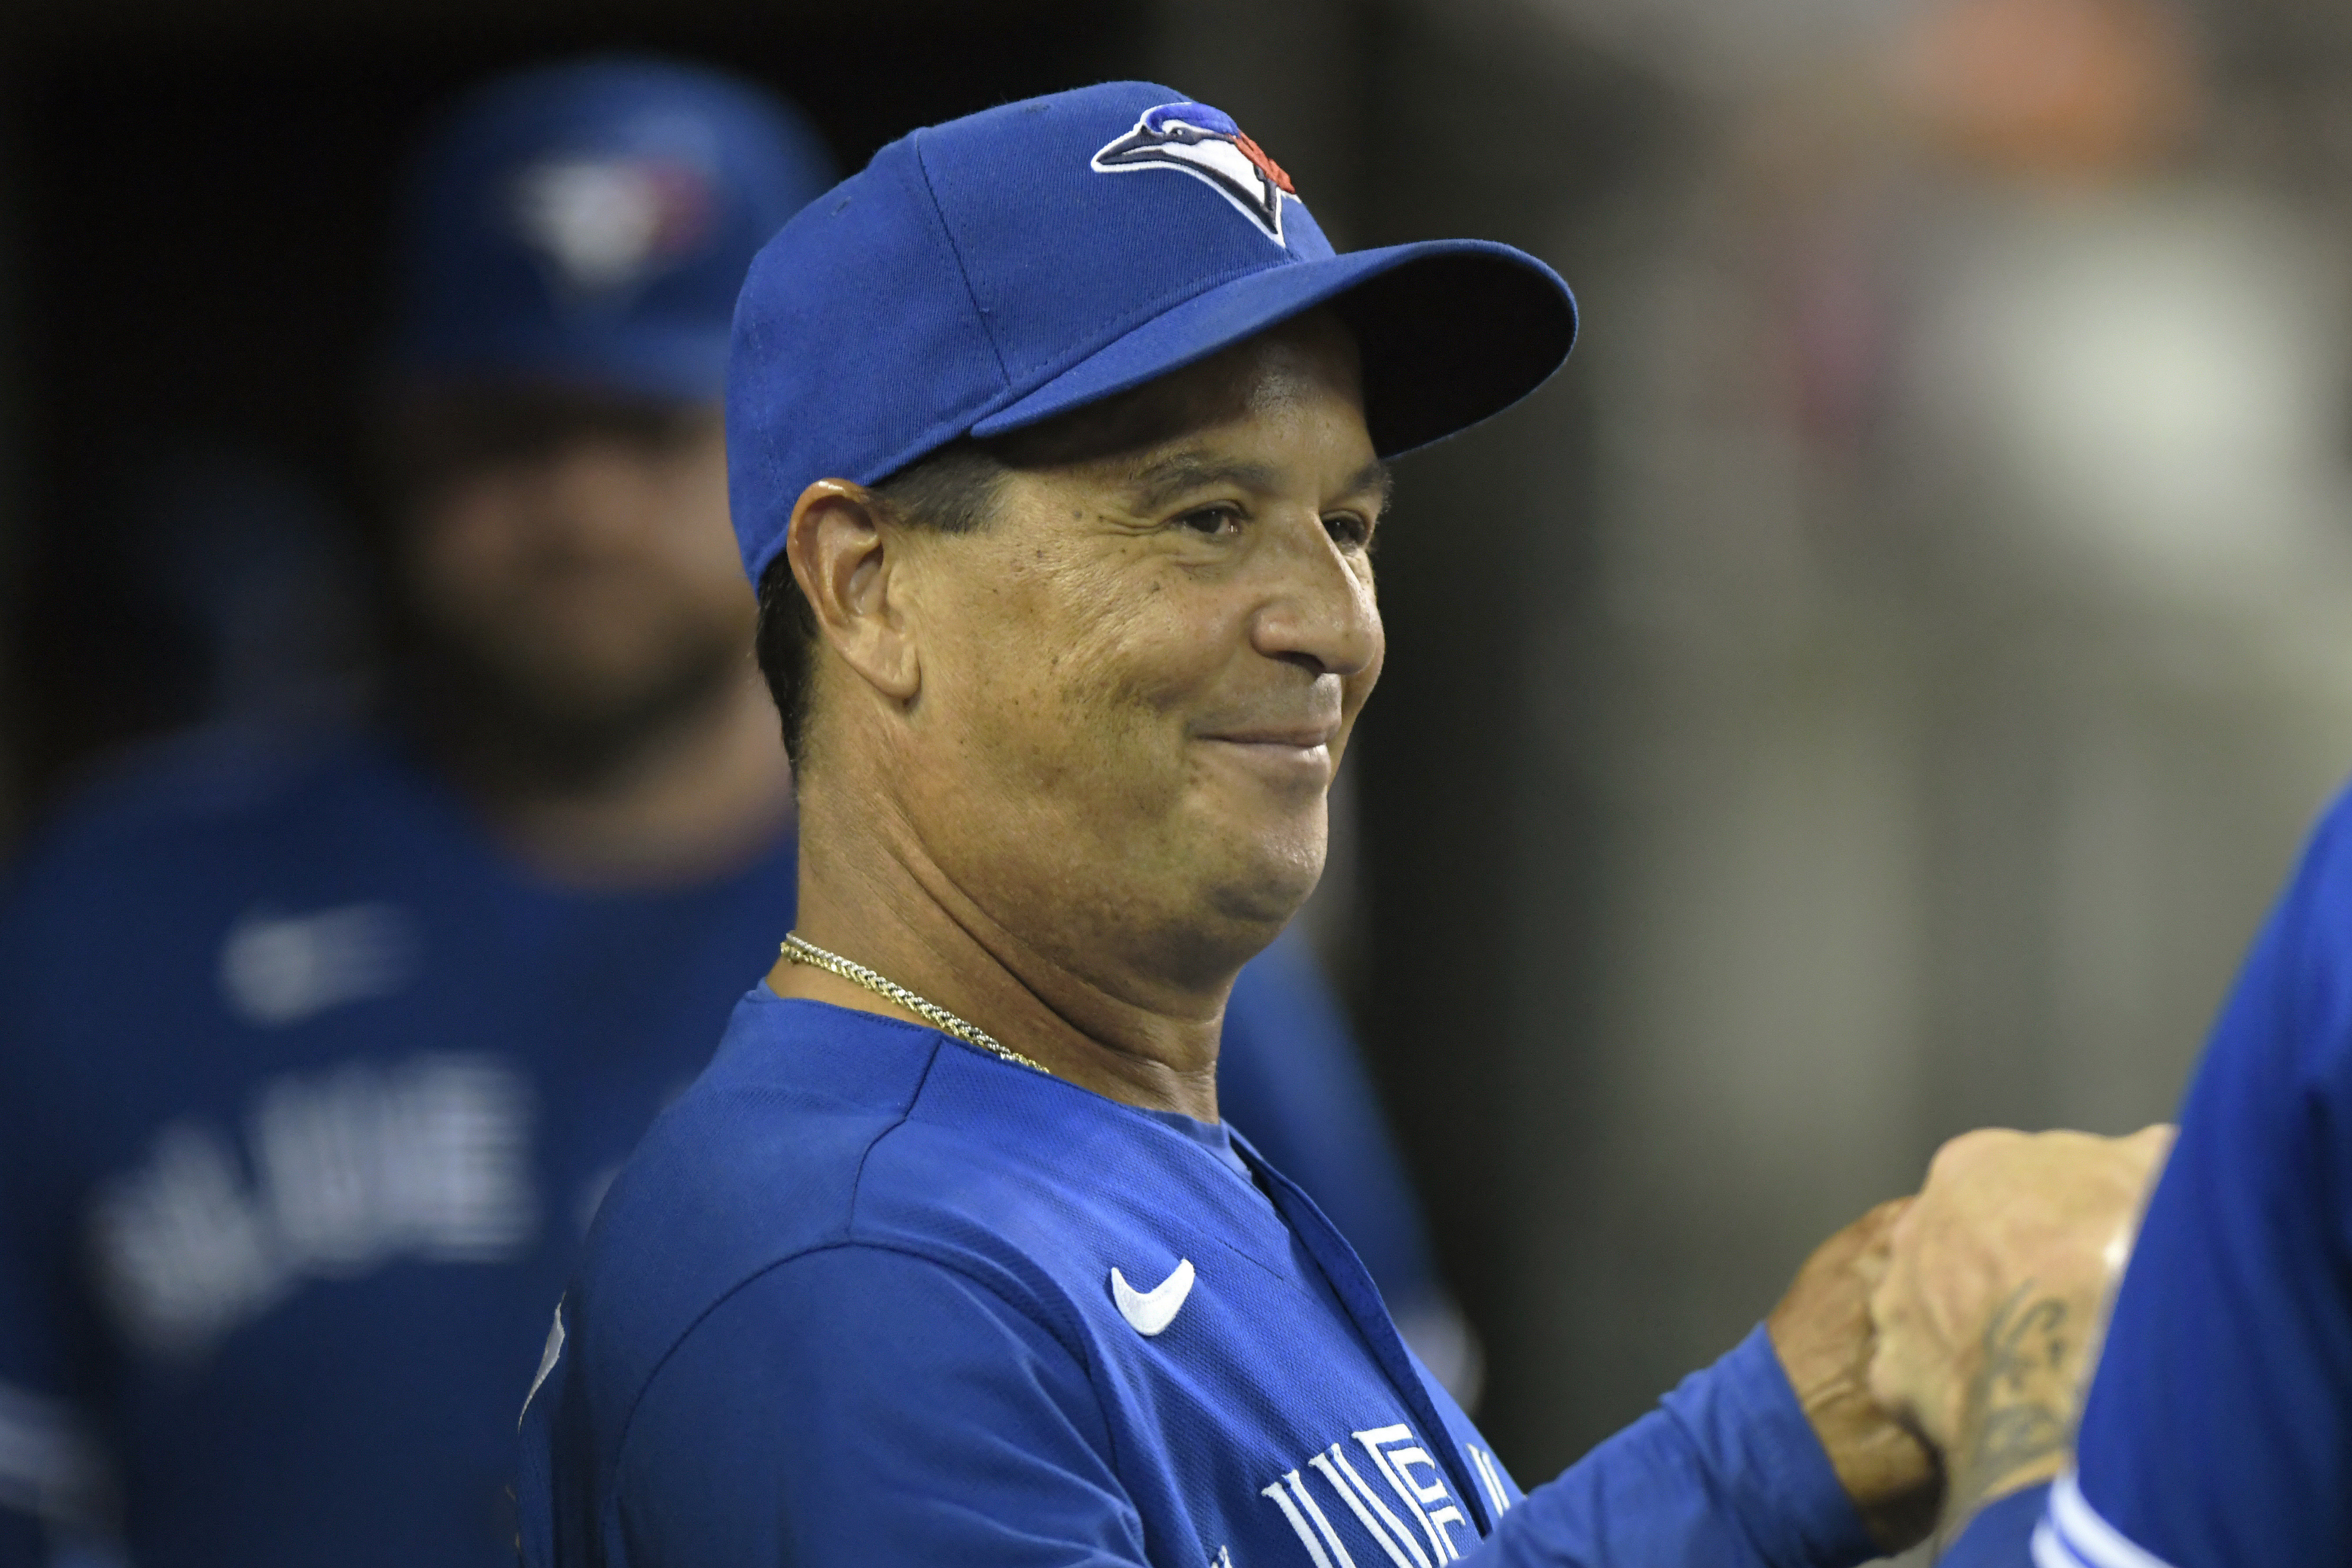 Why the Blue Jays won't be feeling sorry for teams that show up